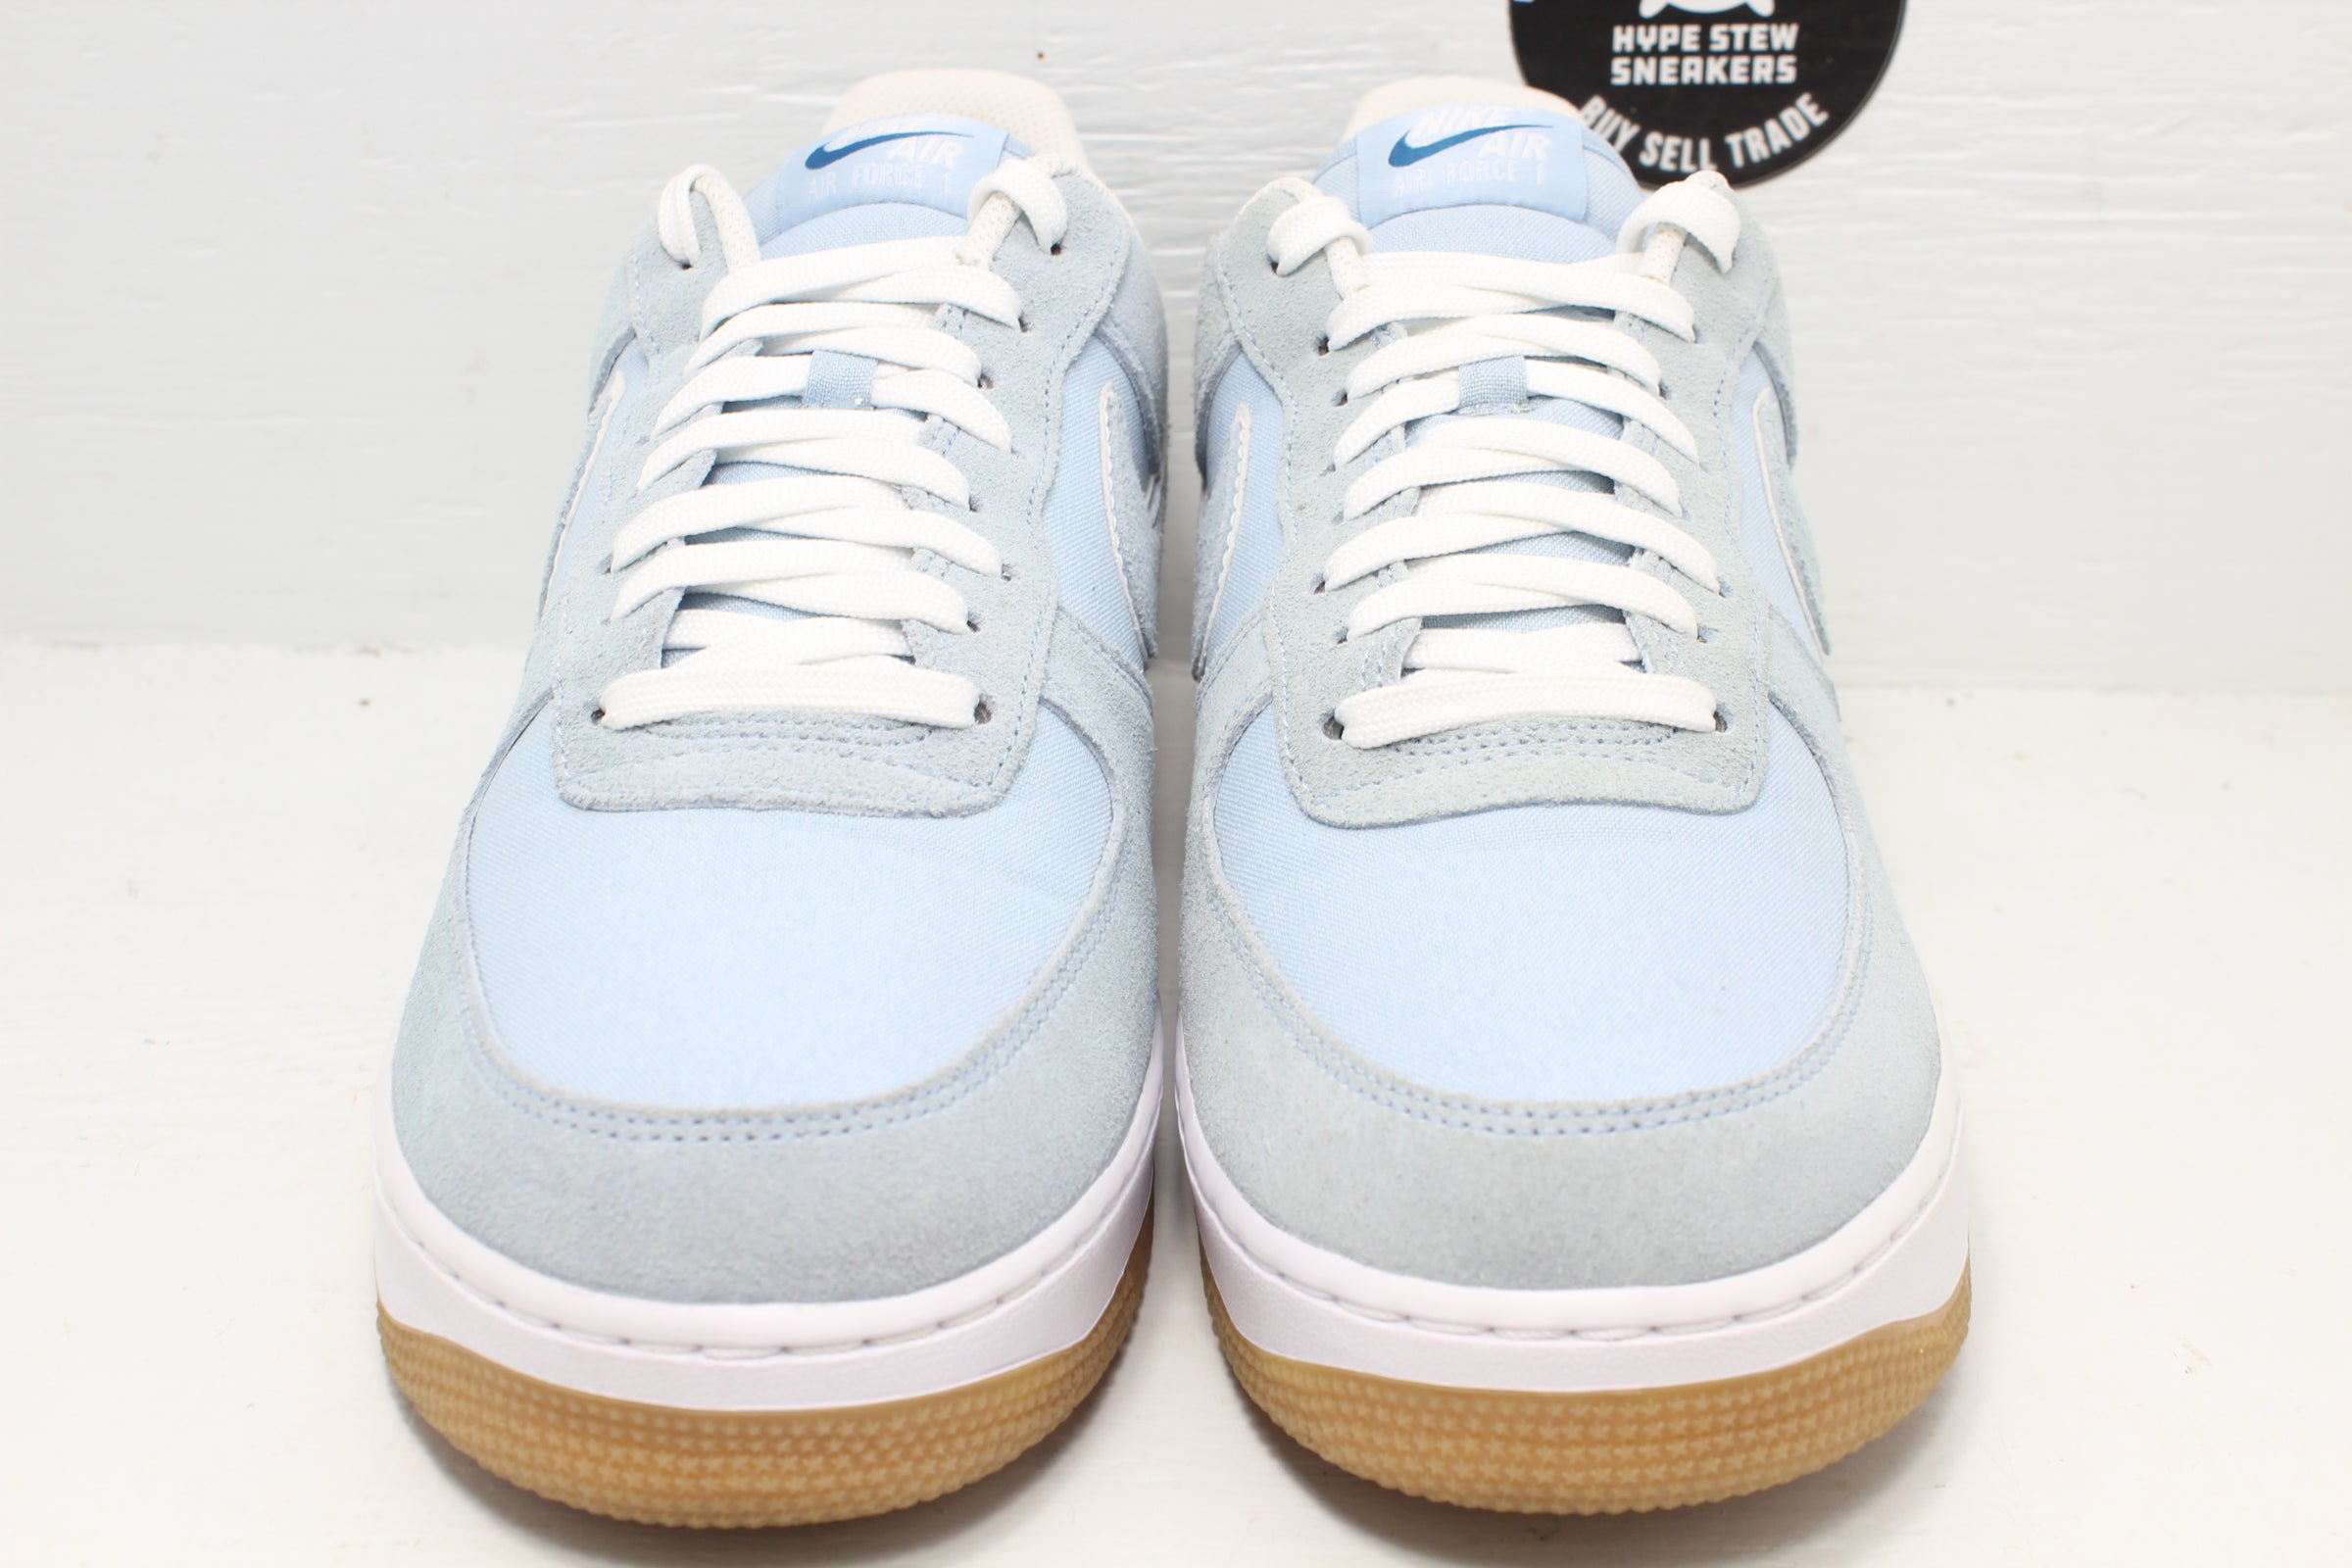 More Images Of The Nike Air Force 1 Low 07 LV8 Light Armory Blue